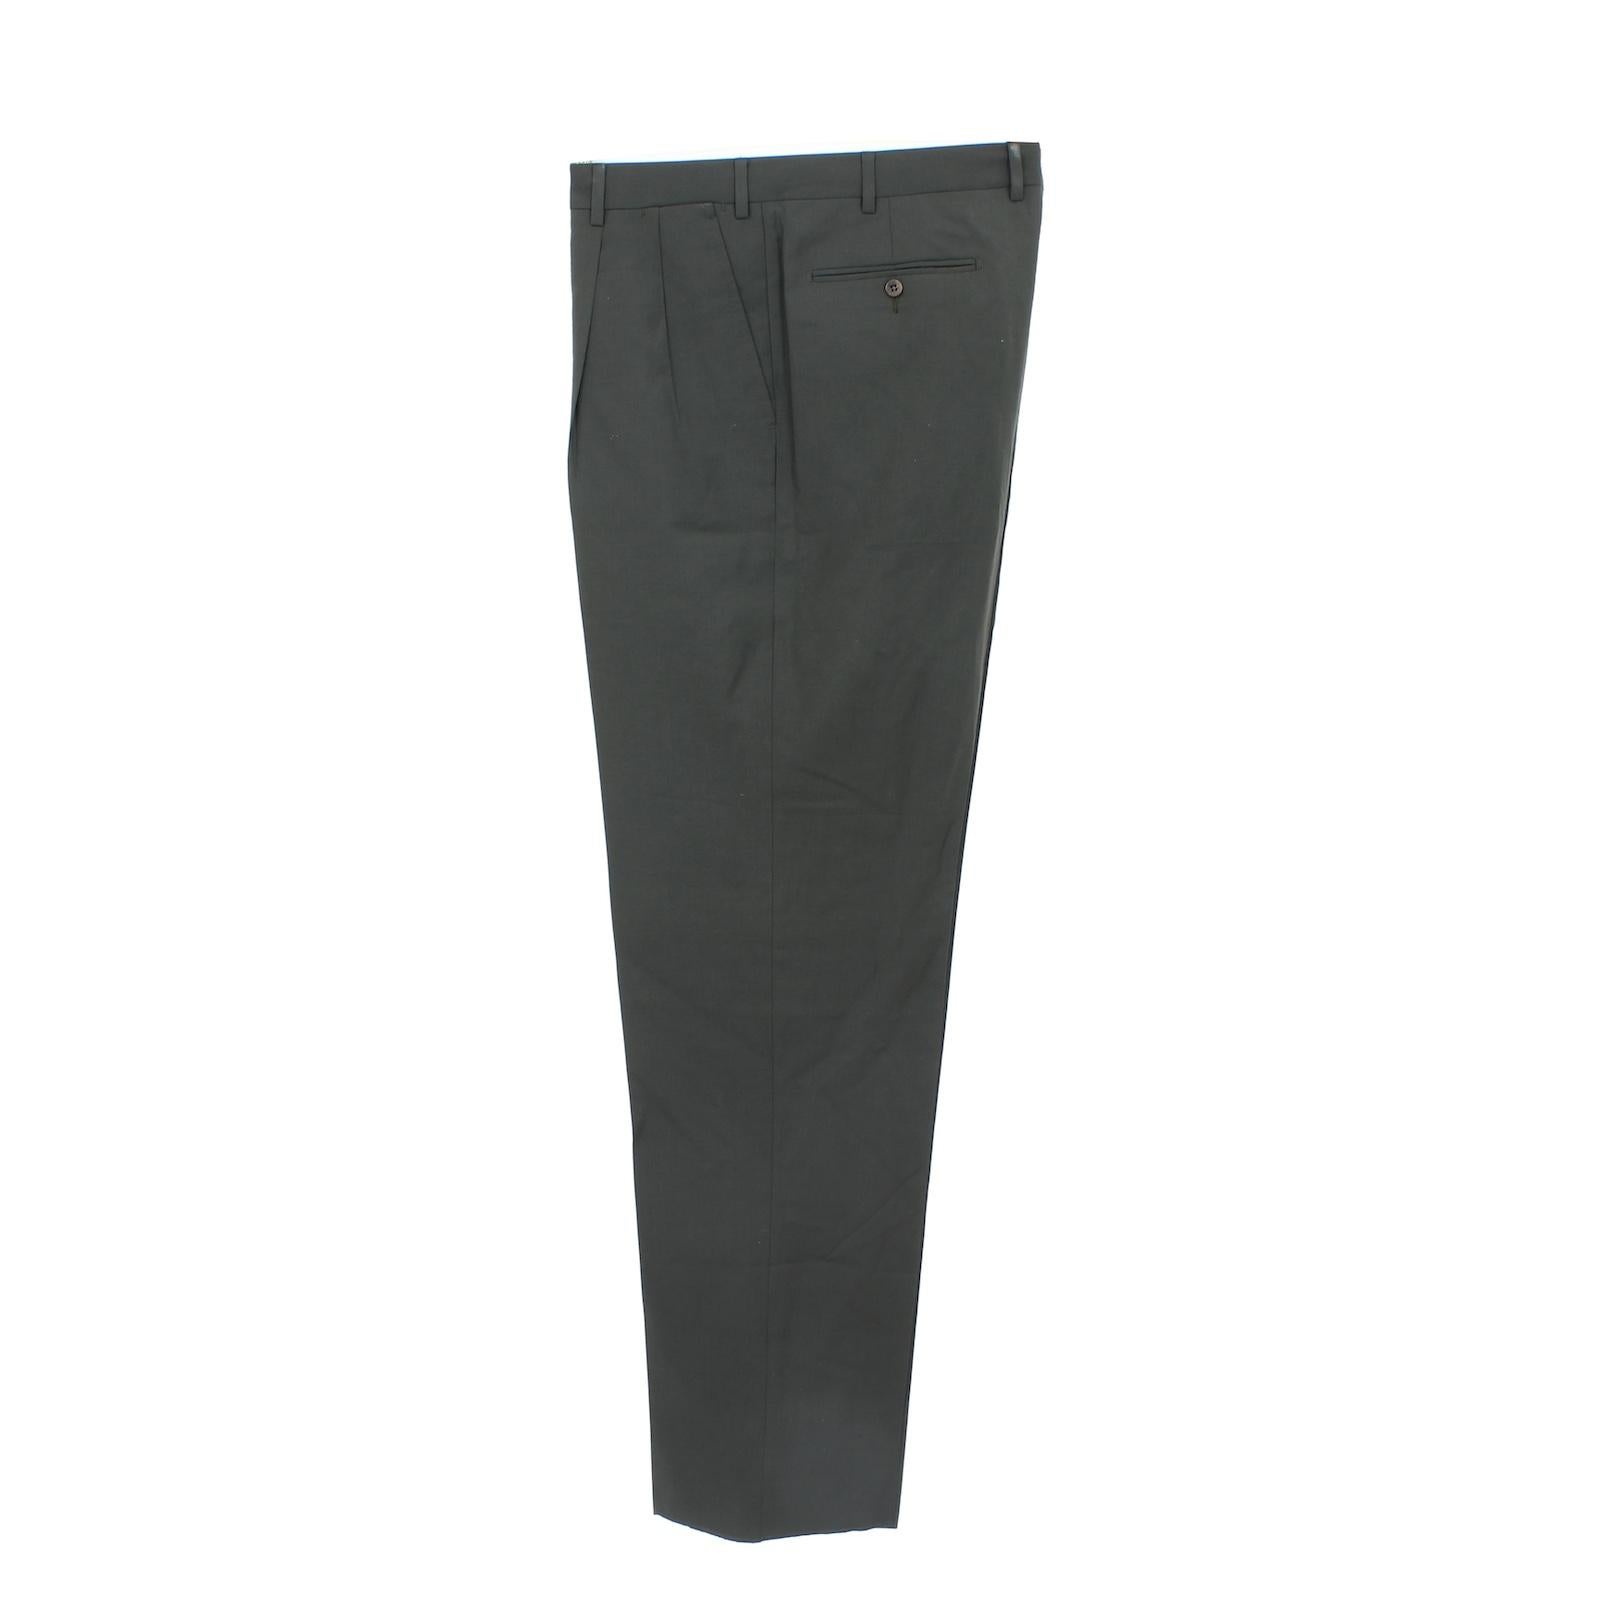 Burberry vintage 90s trousers. Classic model, green colour, 100% wool fabric. Made in Italy. New from warehouse stock.

Size: 58 It 48 Us 48 Uk

Waist: 50 cm
Length: 127 cm
Hem: 24 cm
Inseam length: 97 cm